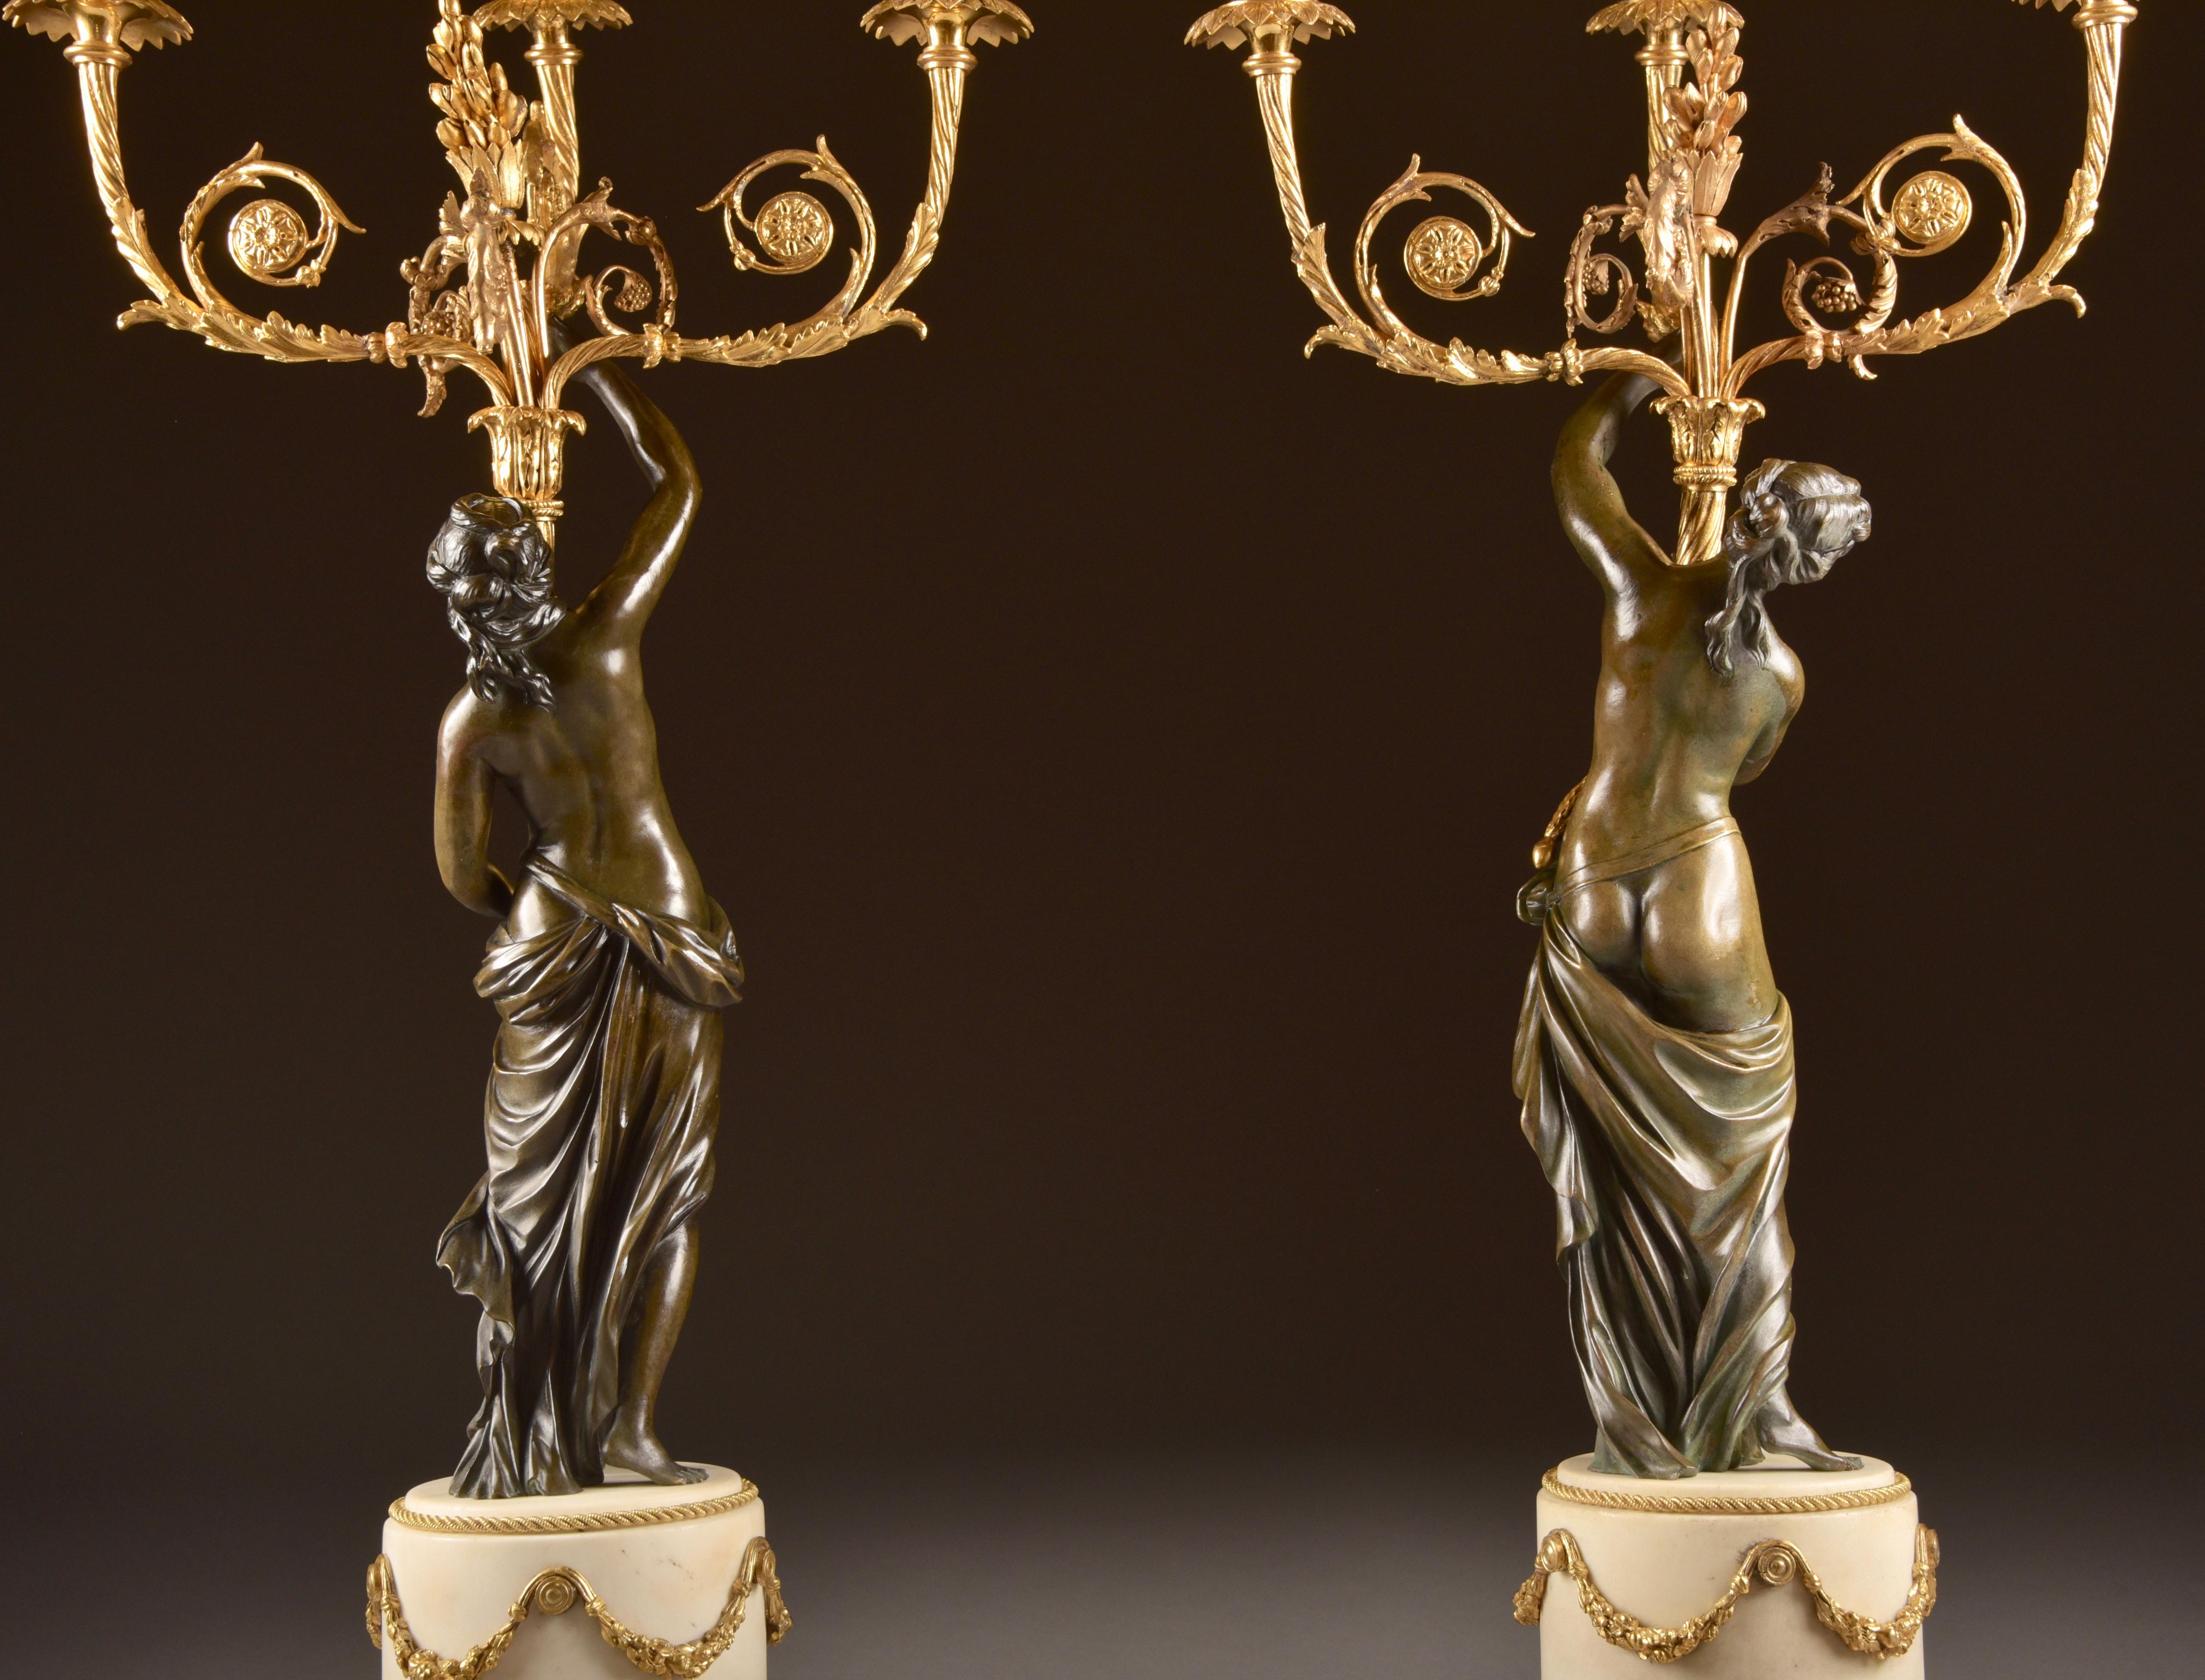 A big (62 cm) pair of very beautiful patinated bronze of female nude, three-armed French candlesticks, on white marble base.